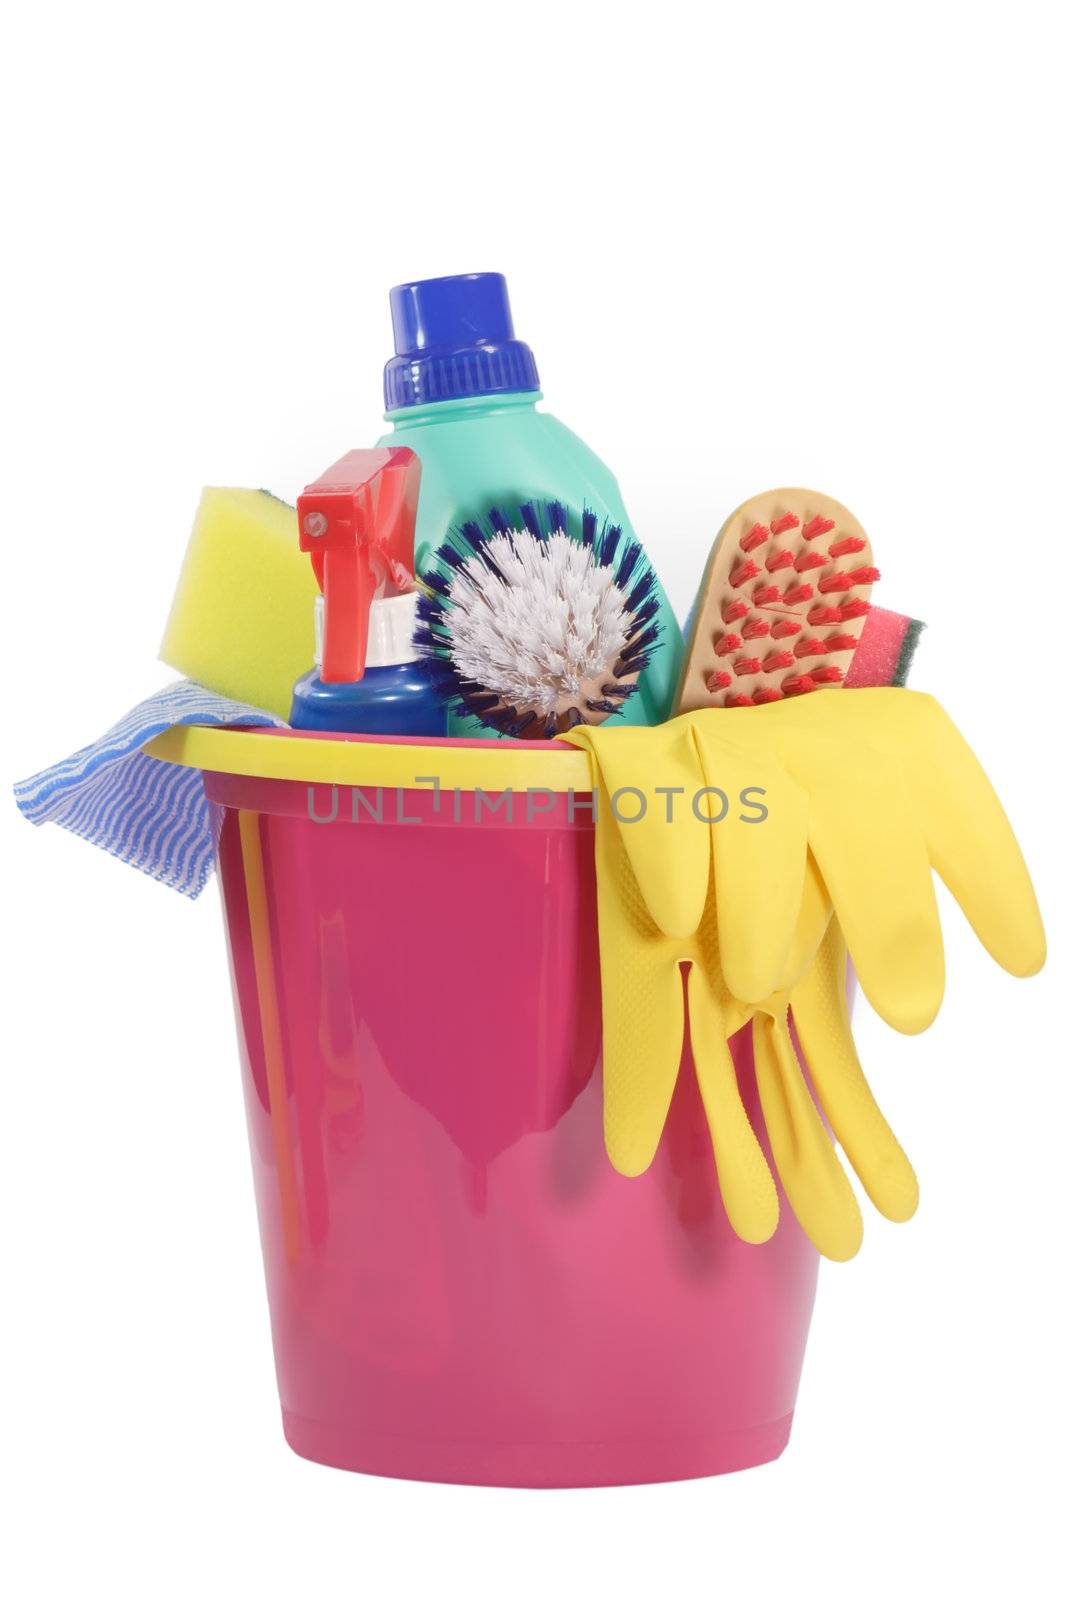 Cleaning Equipment on bright Background
